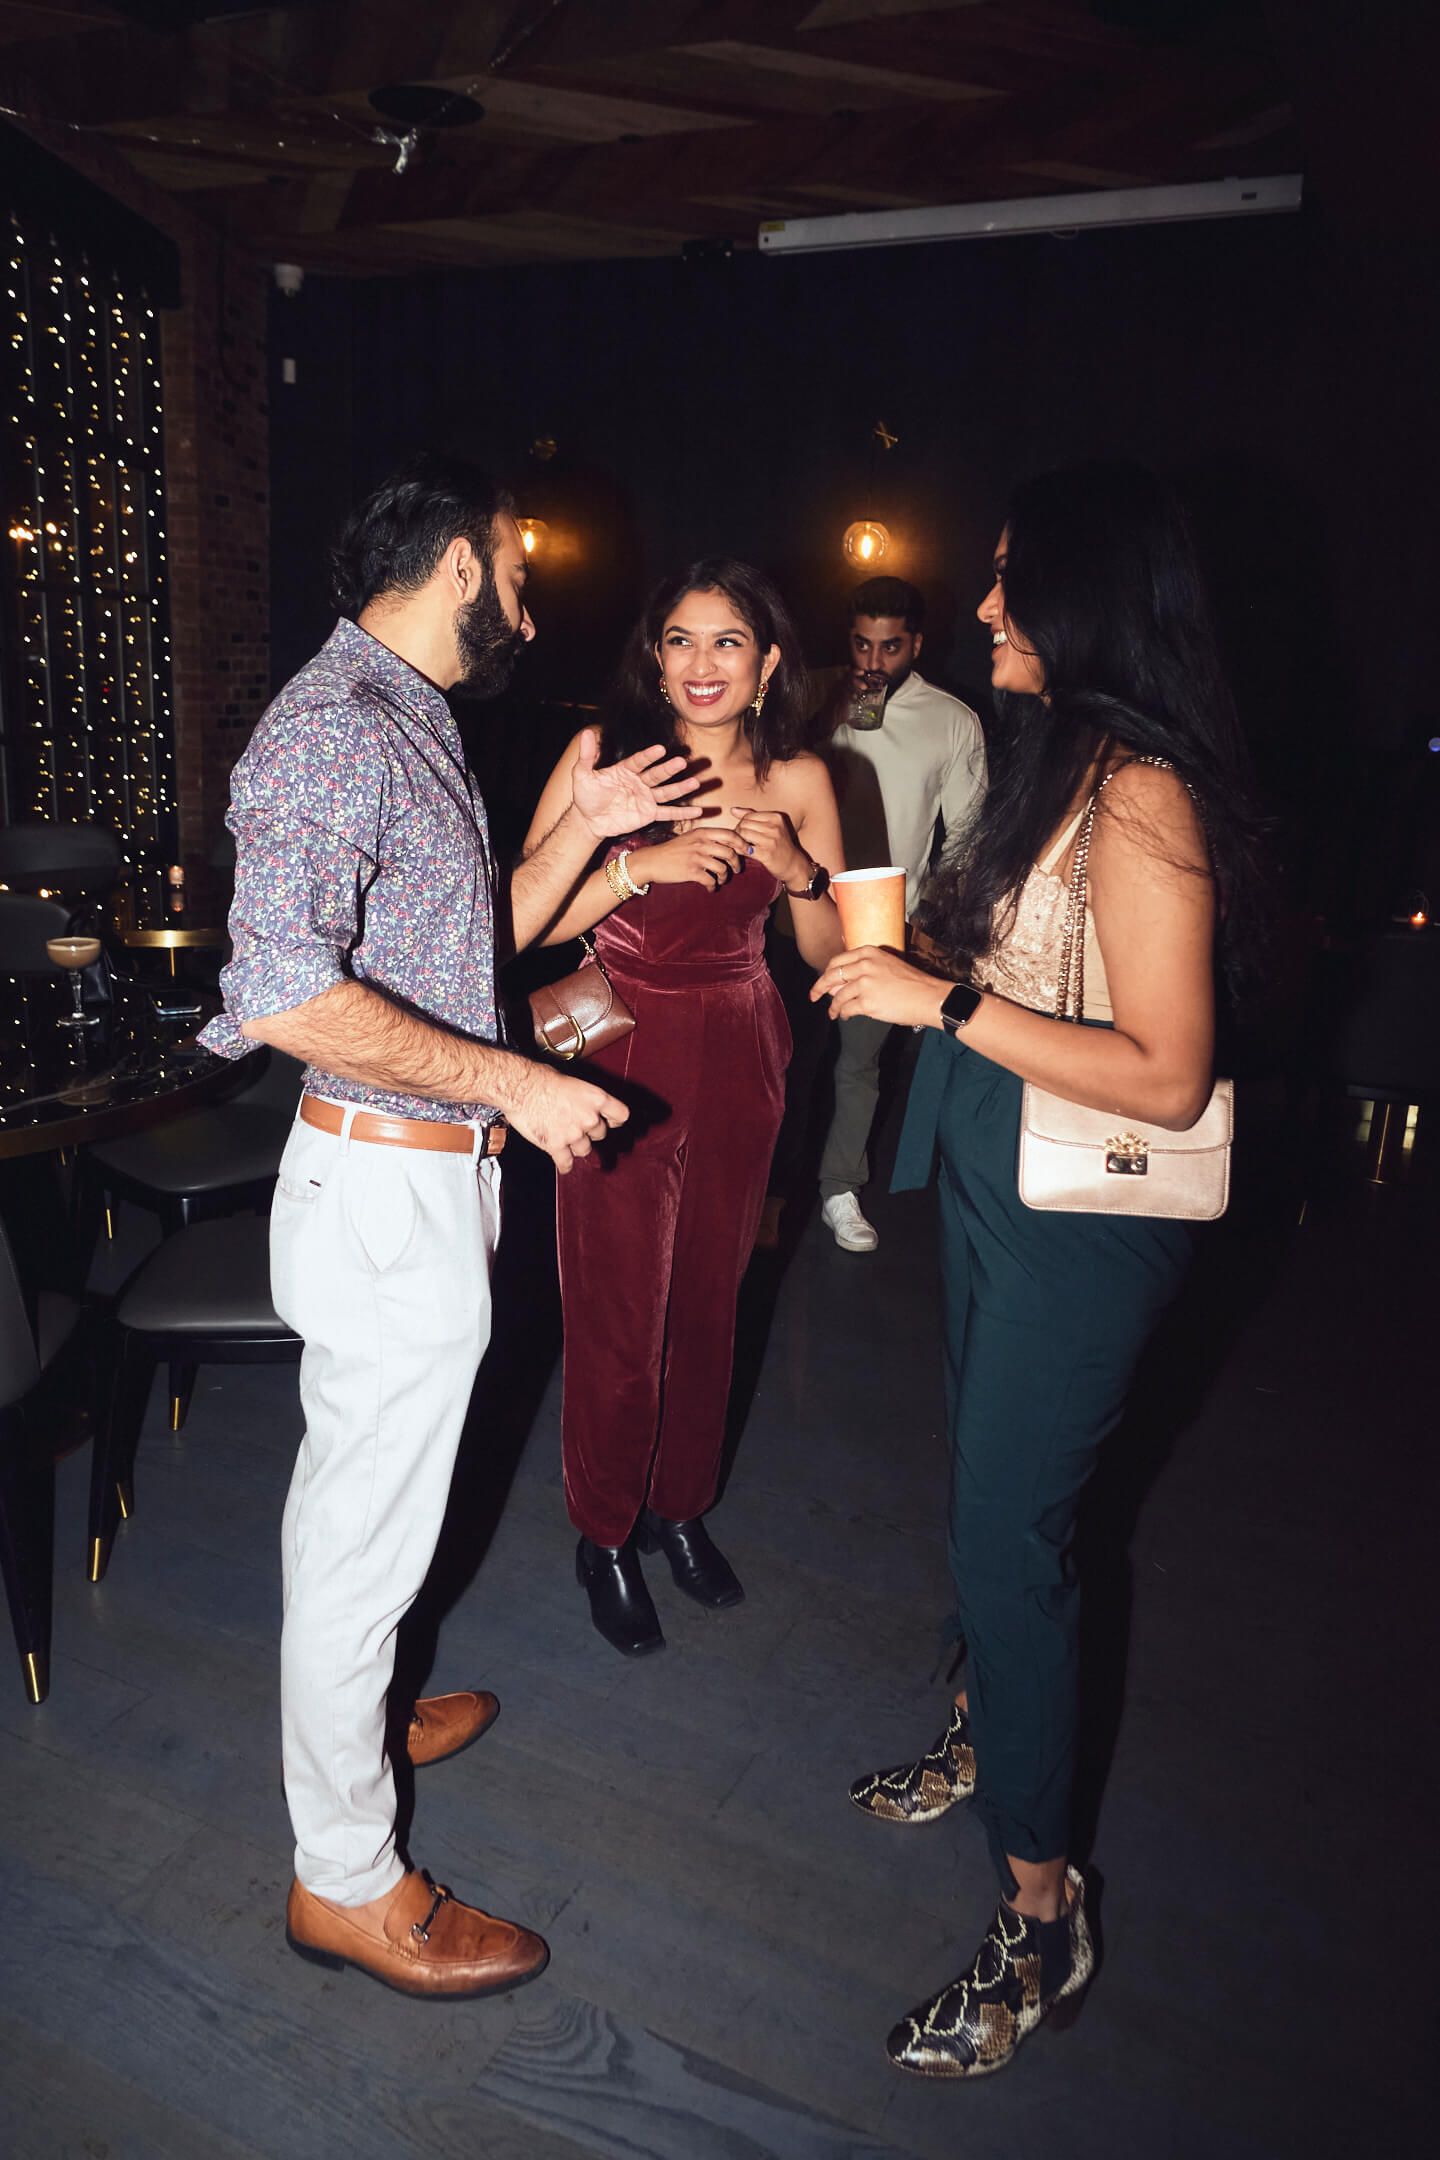 Zubair's Birthday Party - Jungly Restaurant - Event Photography - Lifestyle Photography - Long Island City, New York 